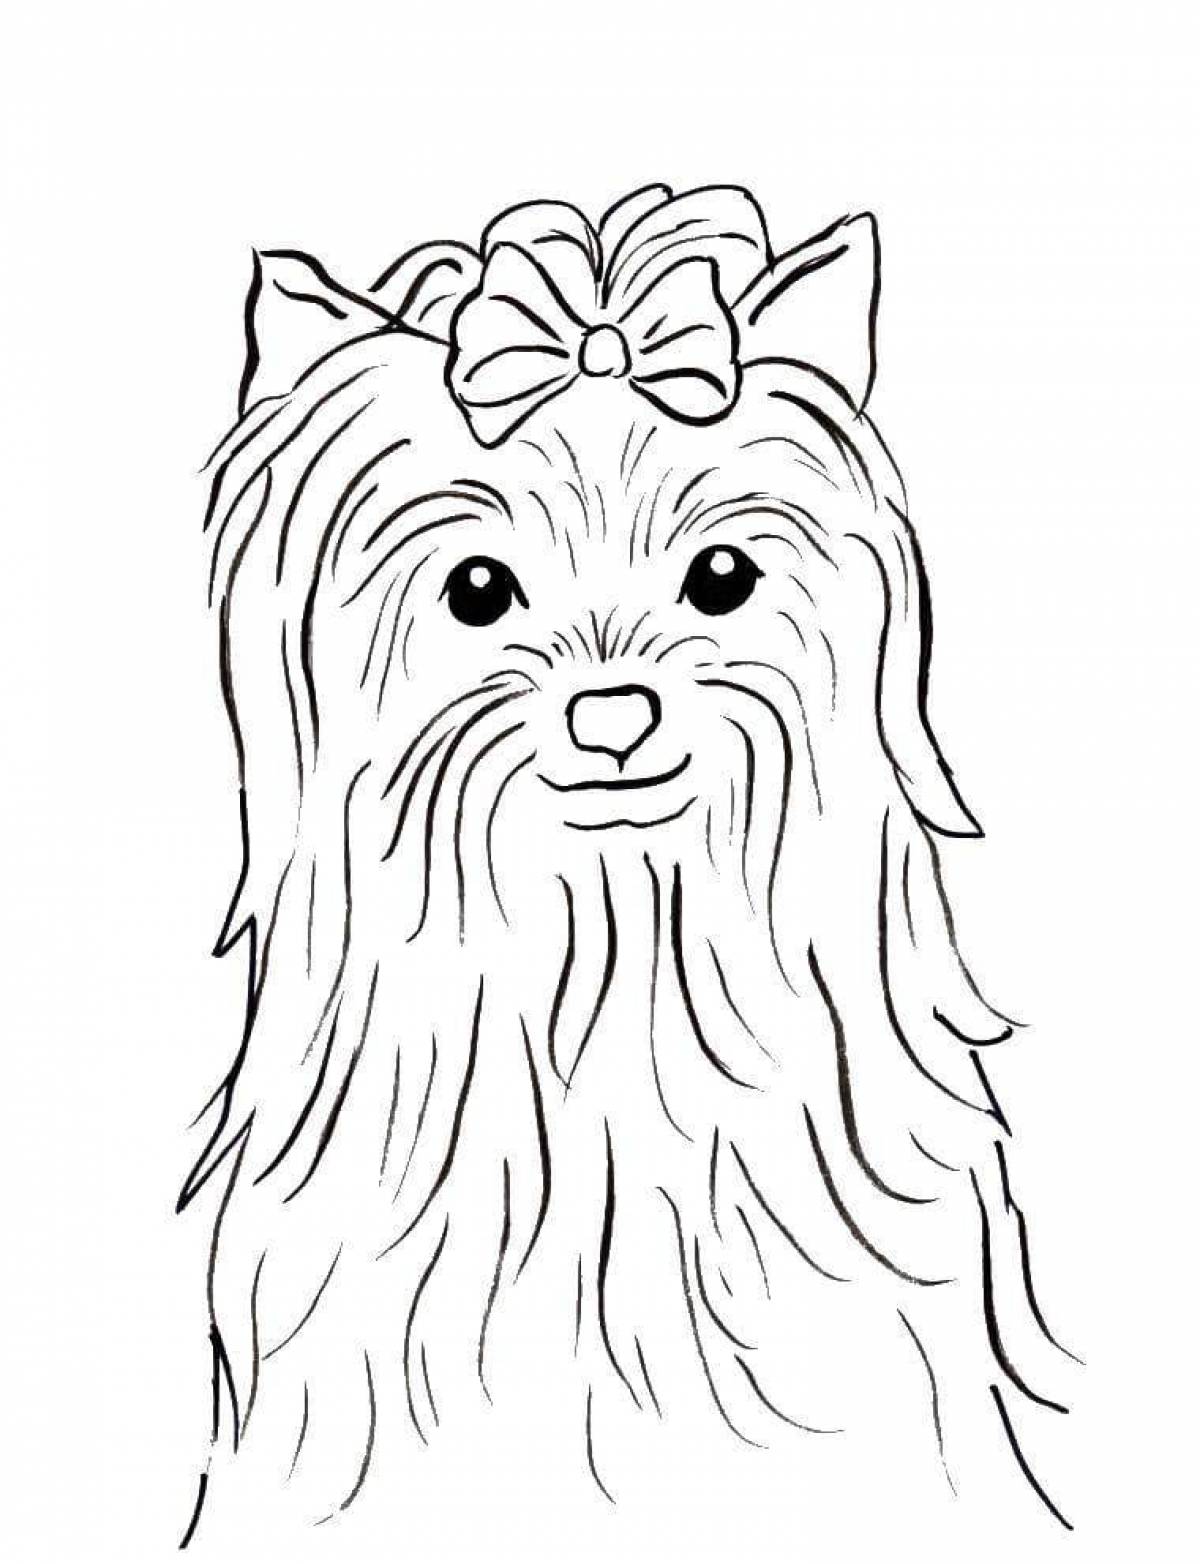 Coloring expressive yorkshire terrier